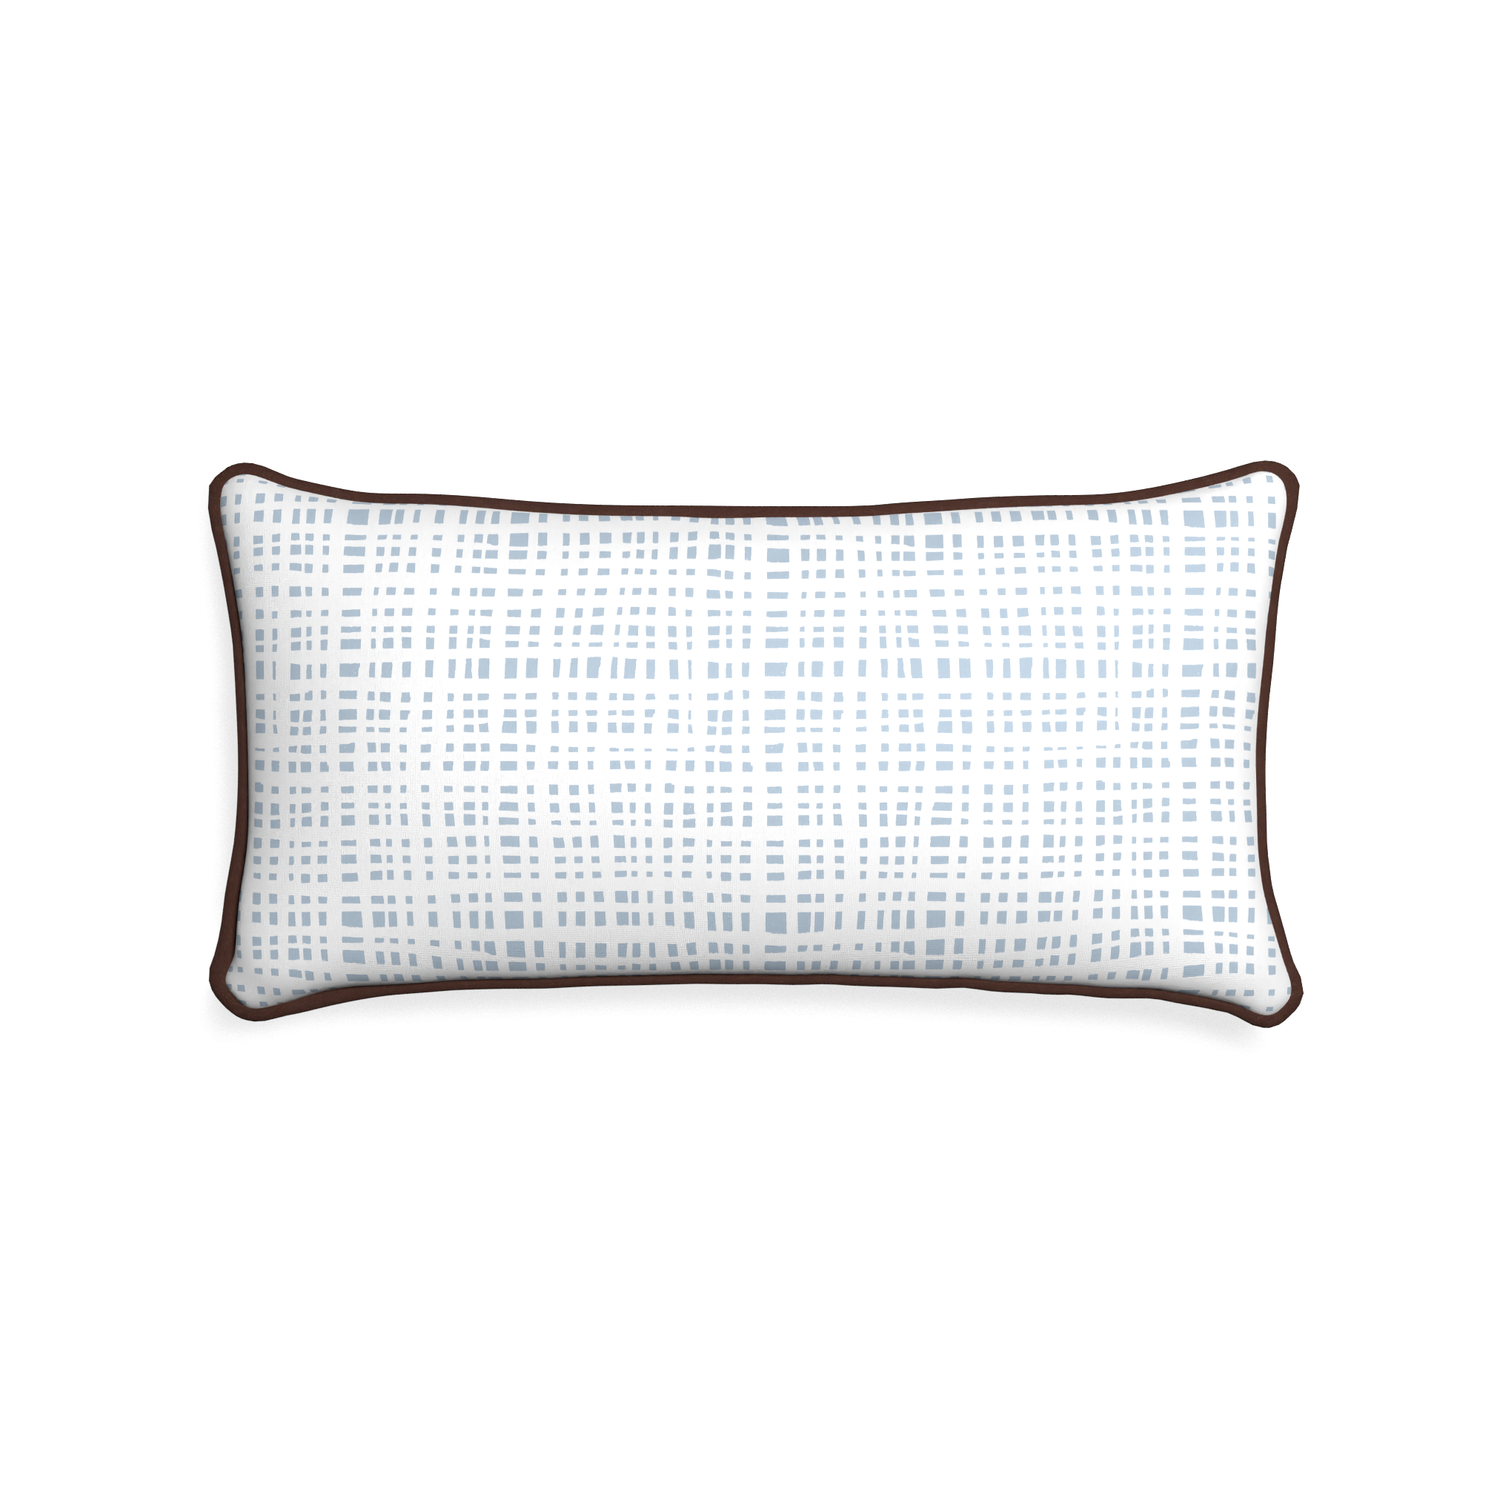 Midi-lumbar ginger sky custom plaid sky bluepillow with w piping on white background